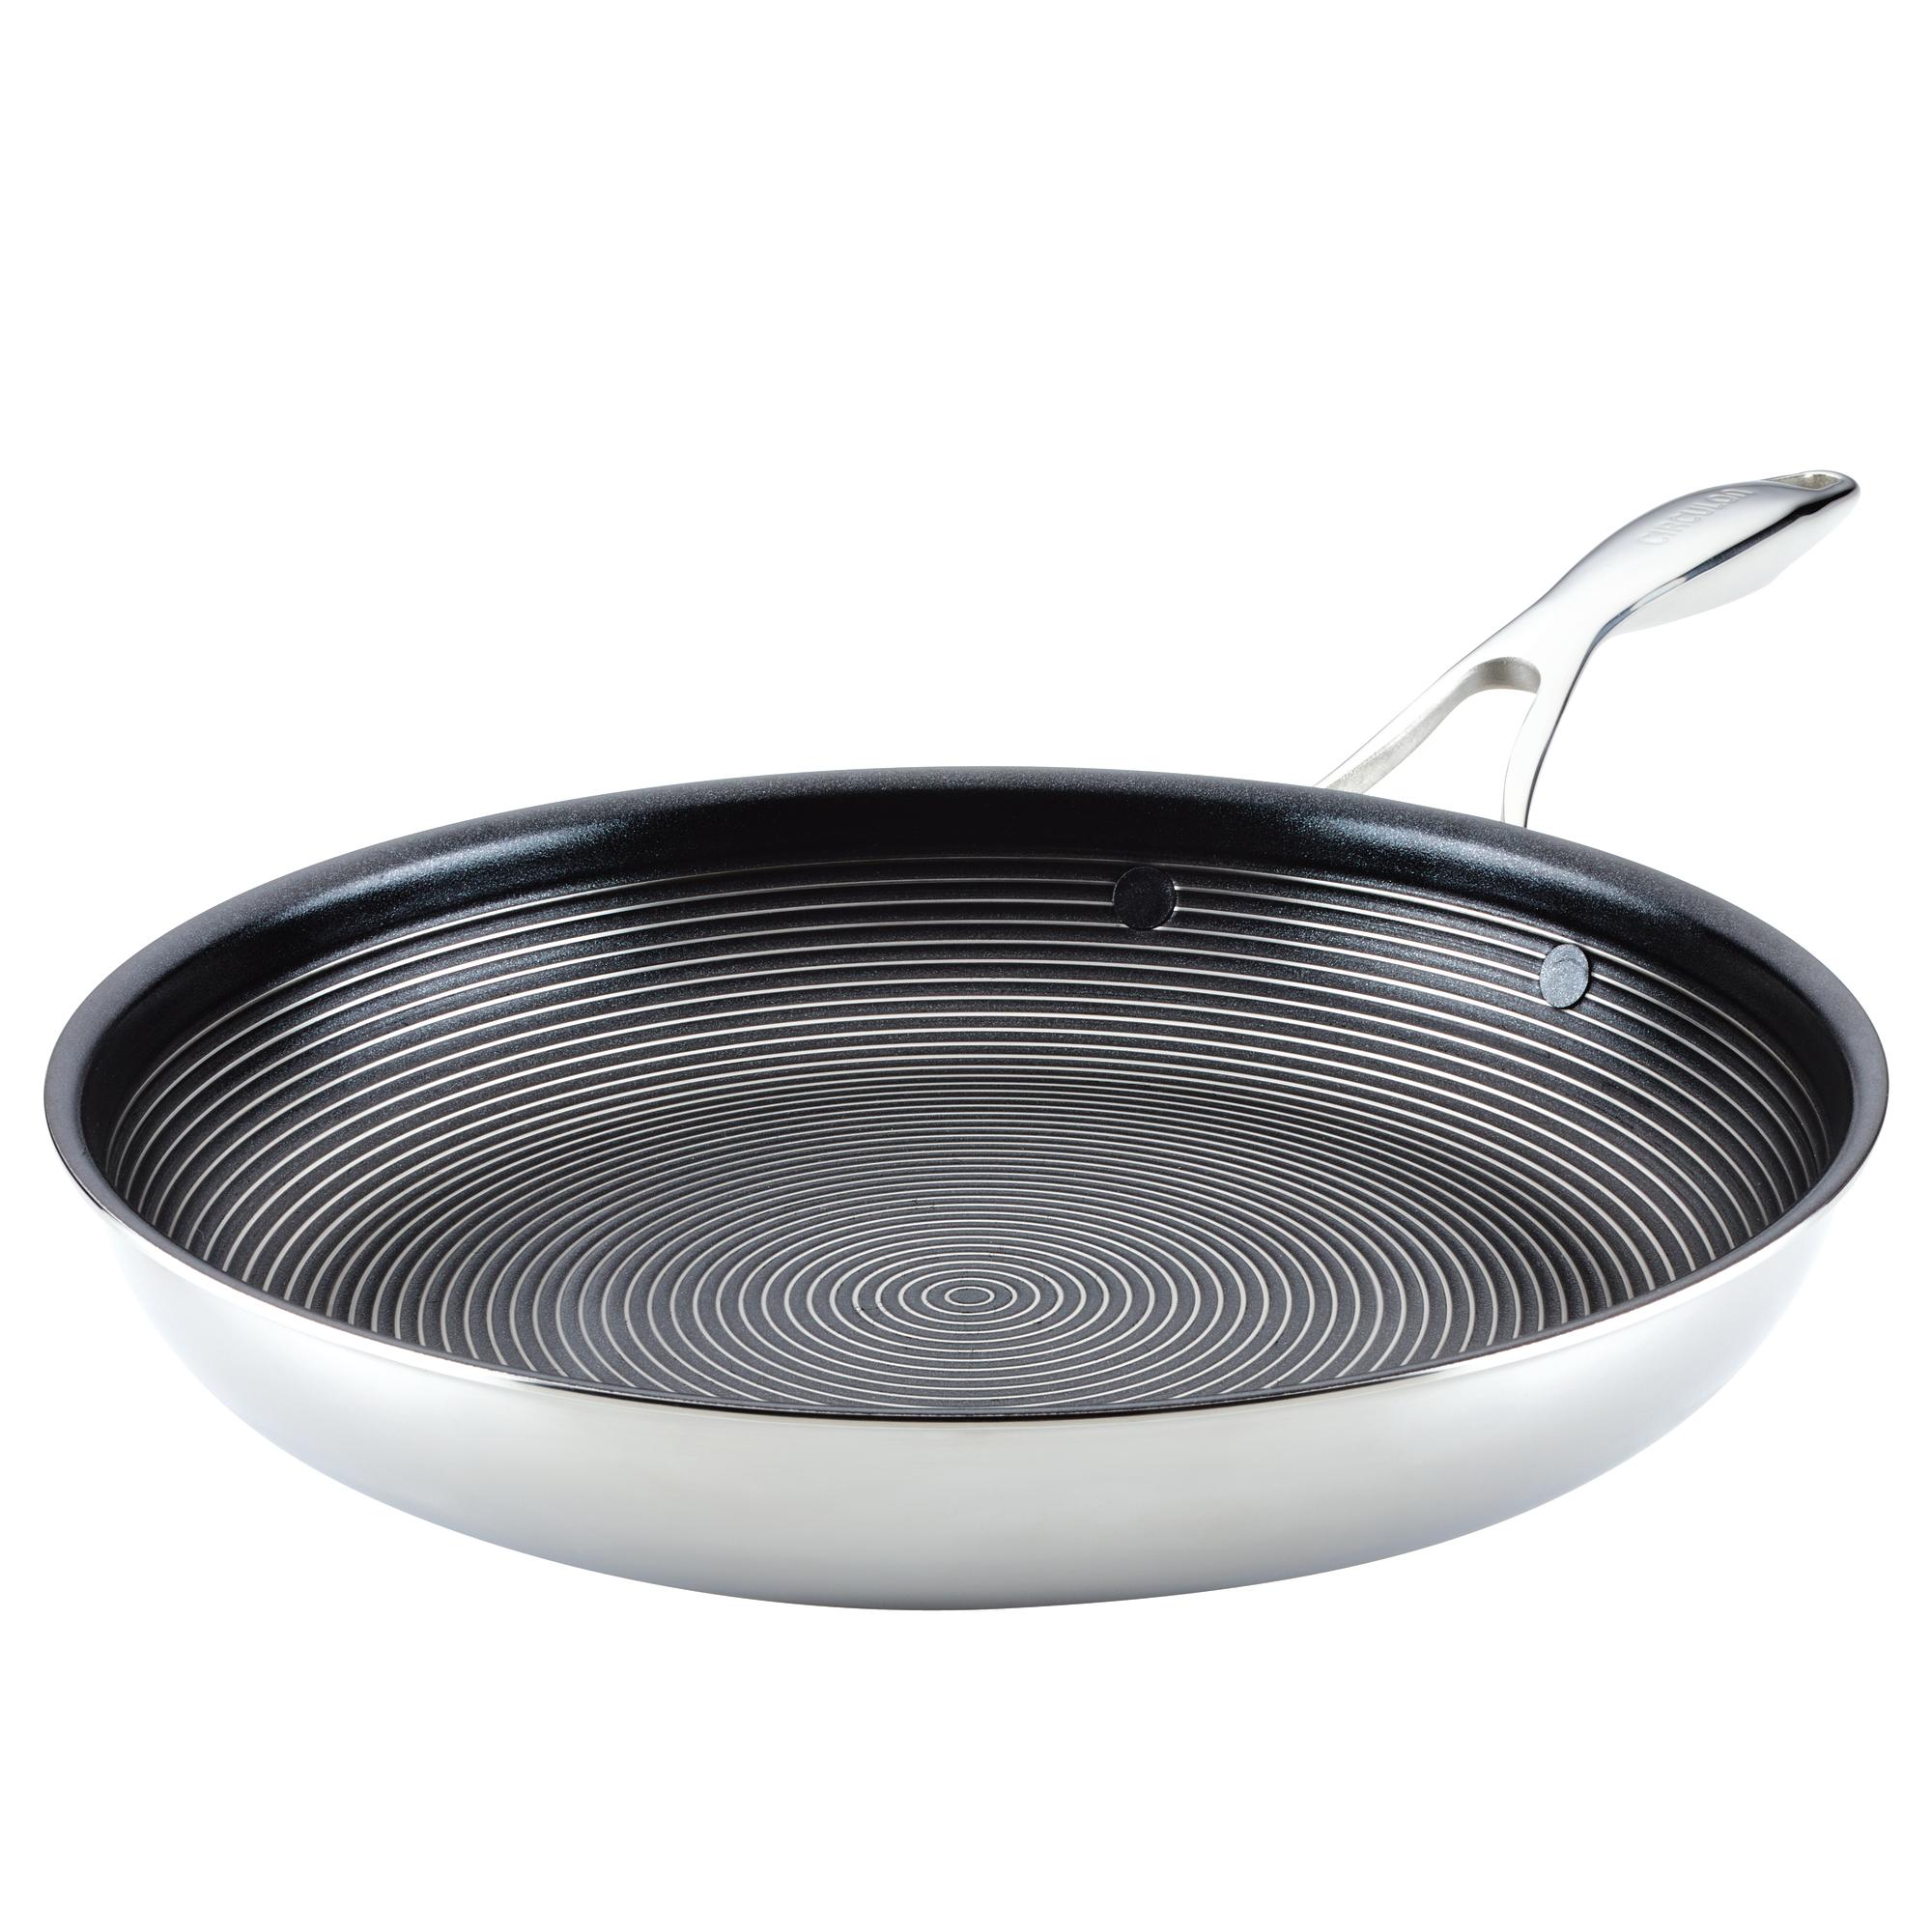 HexClad 12 inch Hybrid Stainless Steel Griddle Nonstick Fry Pan